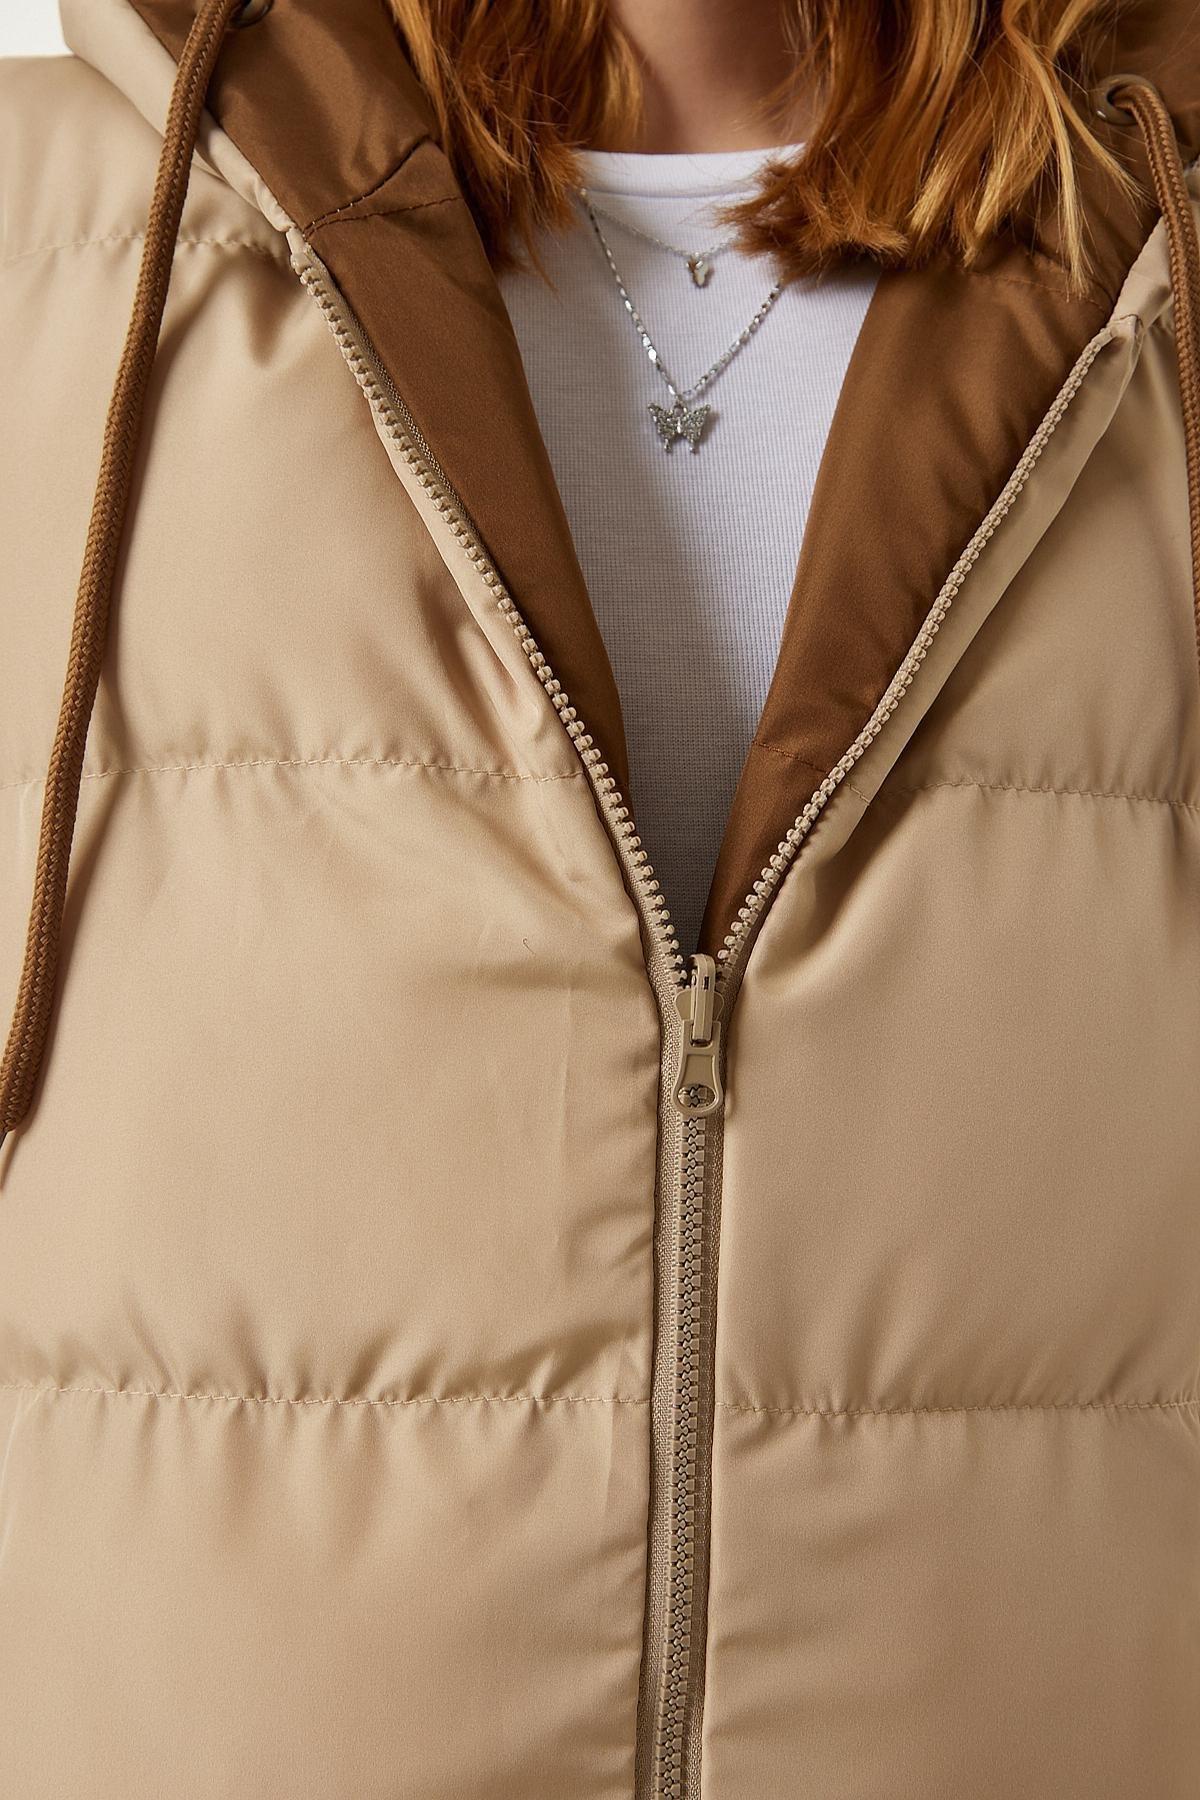 Happiness Istanbul - Beige Hooded Reversible Puffer Vest